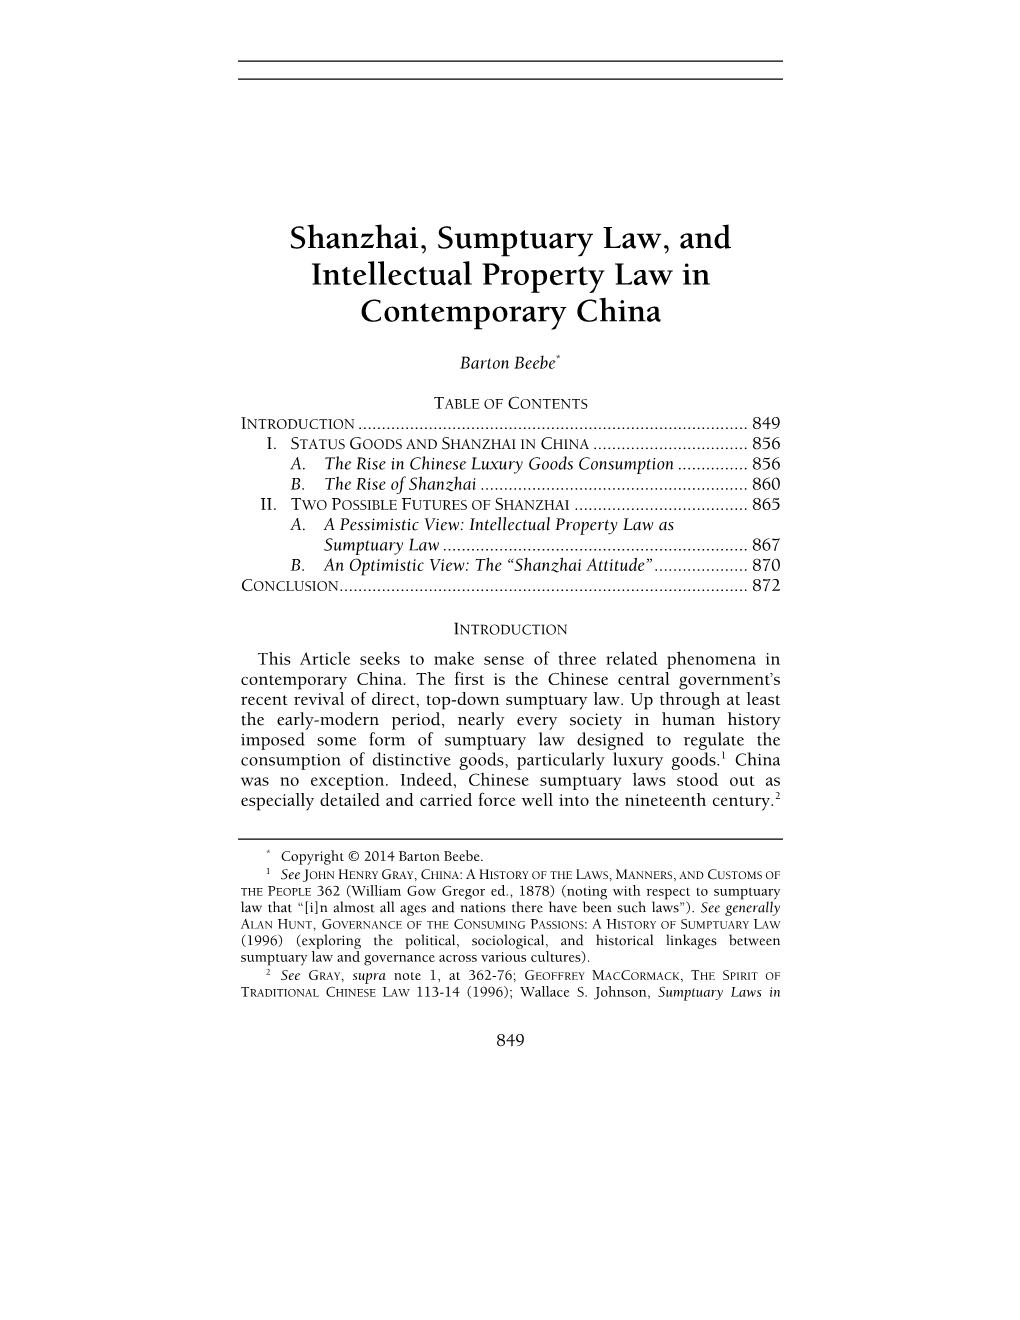 Shanzhai, Sumptuary Law, and Intellectual Property Law in Contemporary China